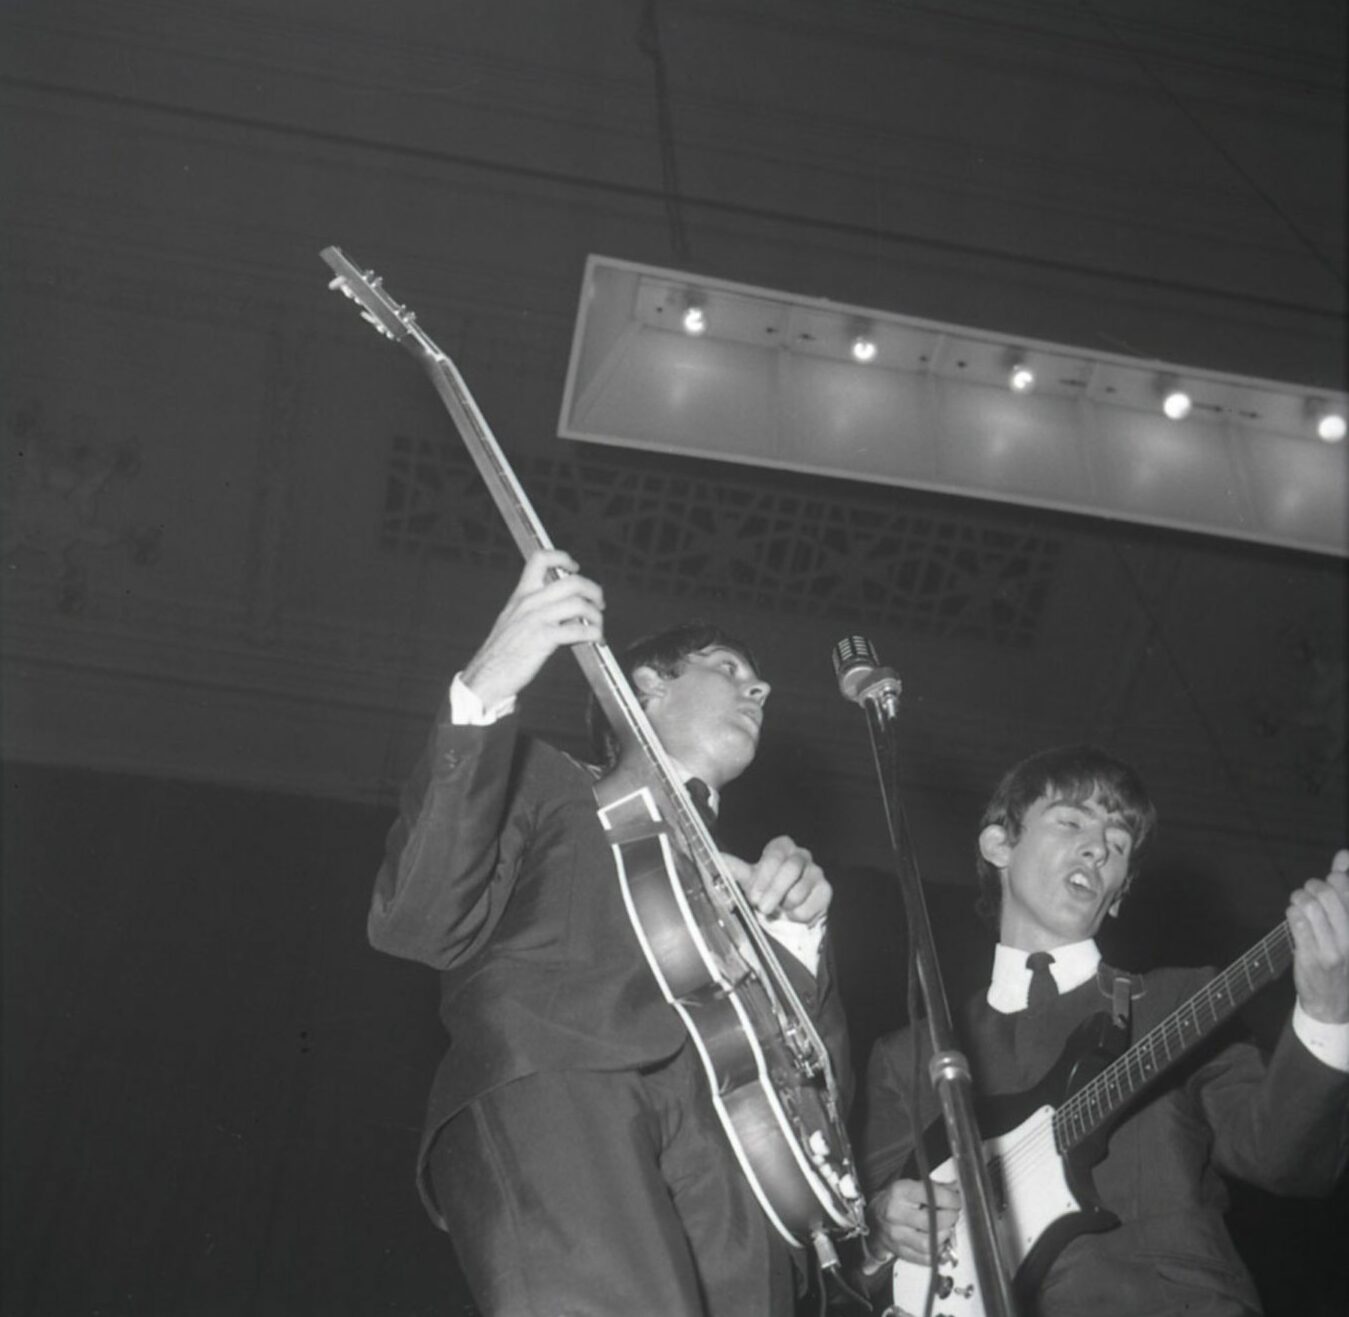 Paul McCartney and George Harrison on stage at the Caird Hall. Image: DC Thomson.